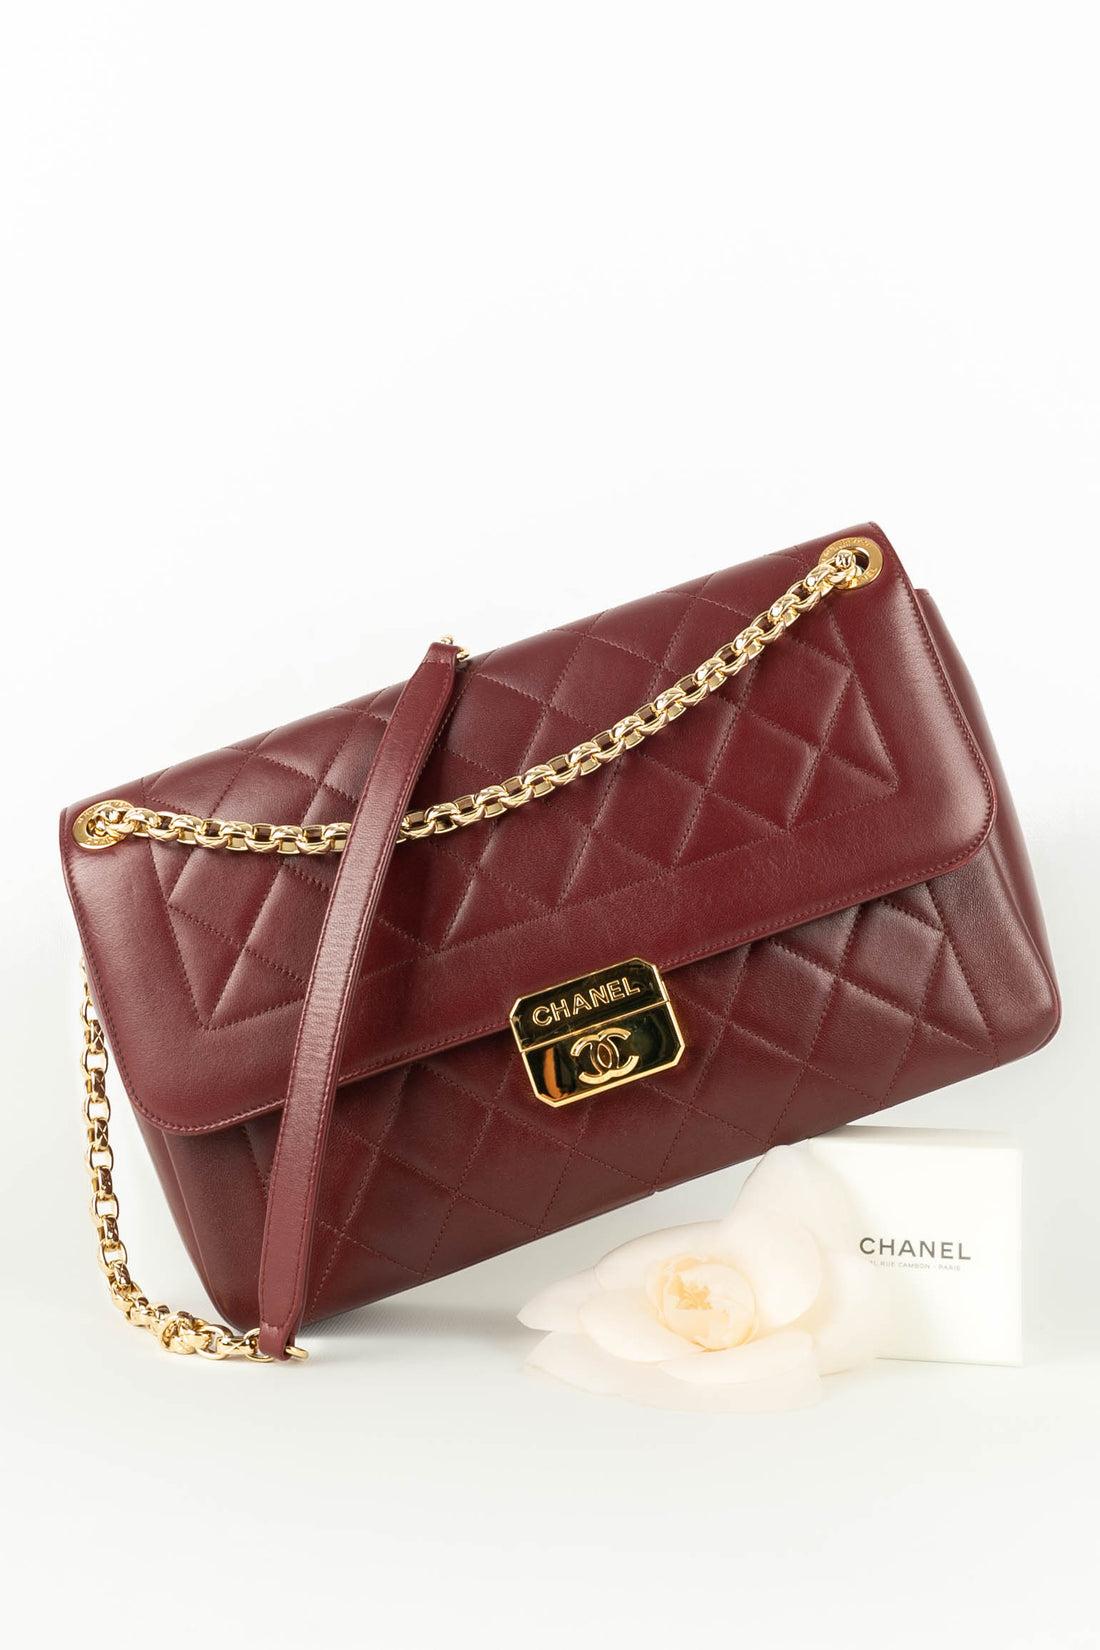 Chanel Burgundy Quilted Leather Bag, 2013/2014 For Sale 10